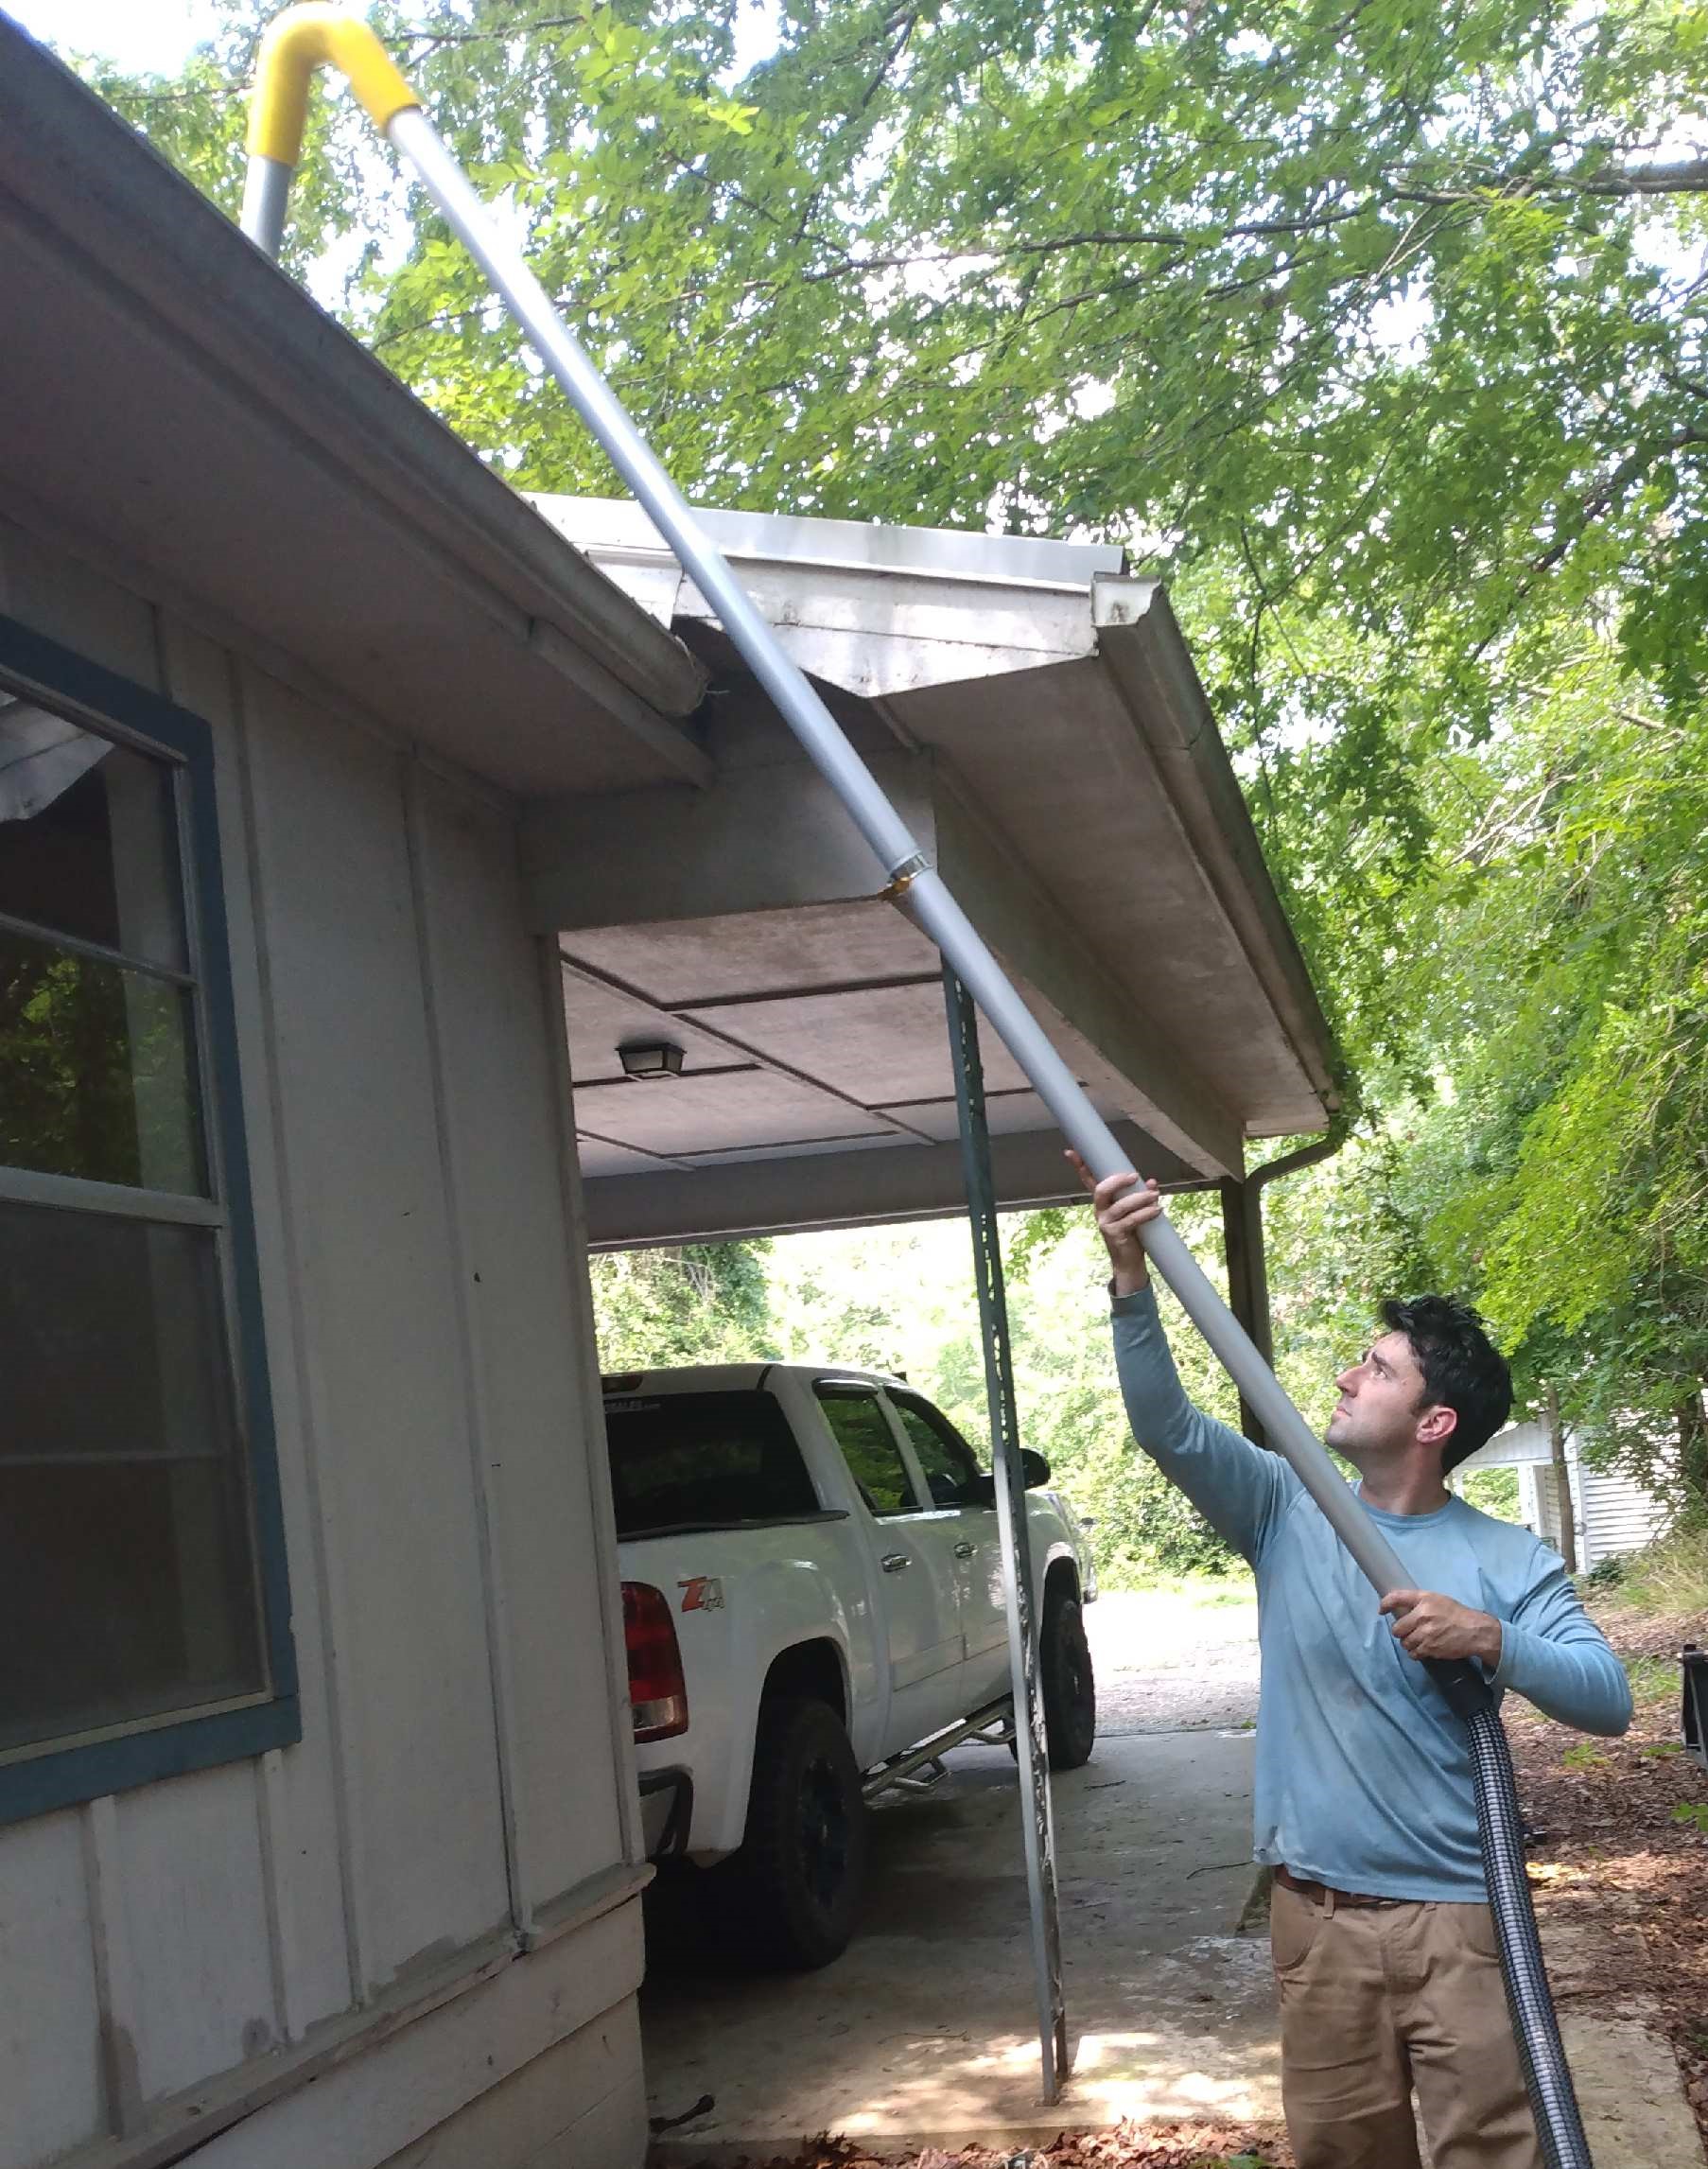 Gutter cleaning at commercial property using vacuum gutter cleaning equipment to remove gutter debris